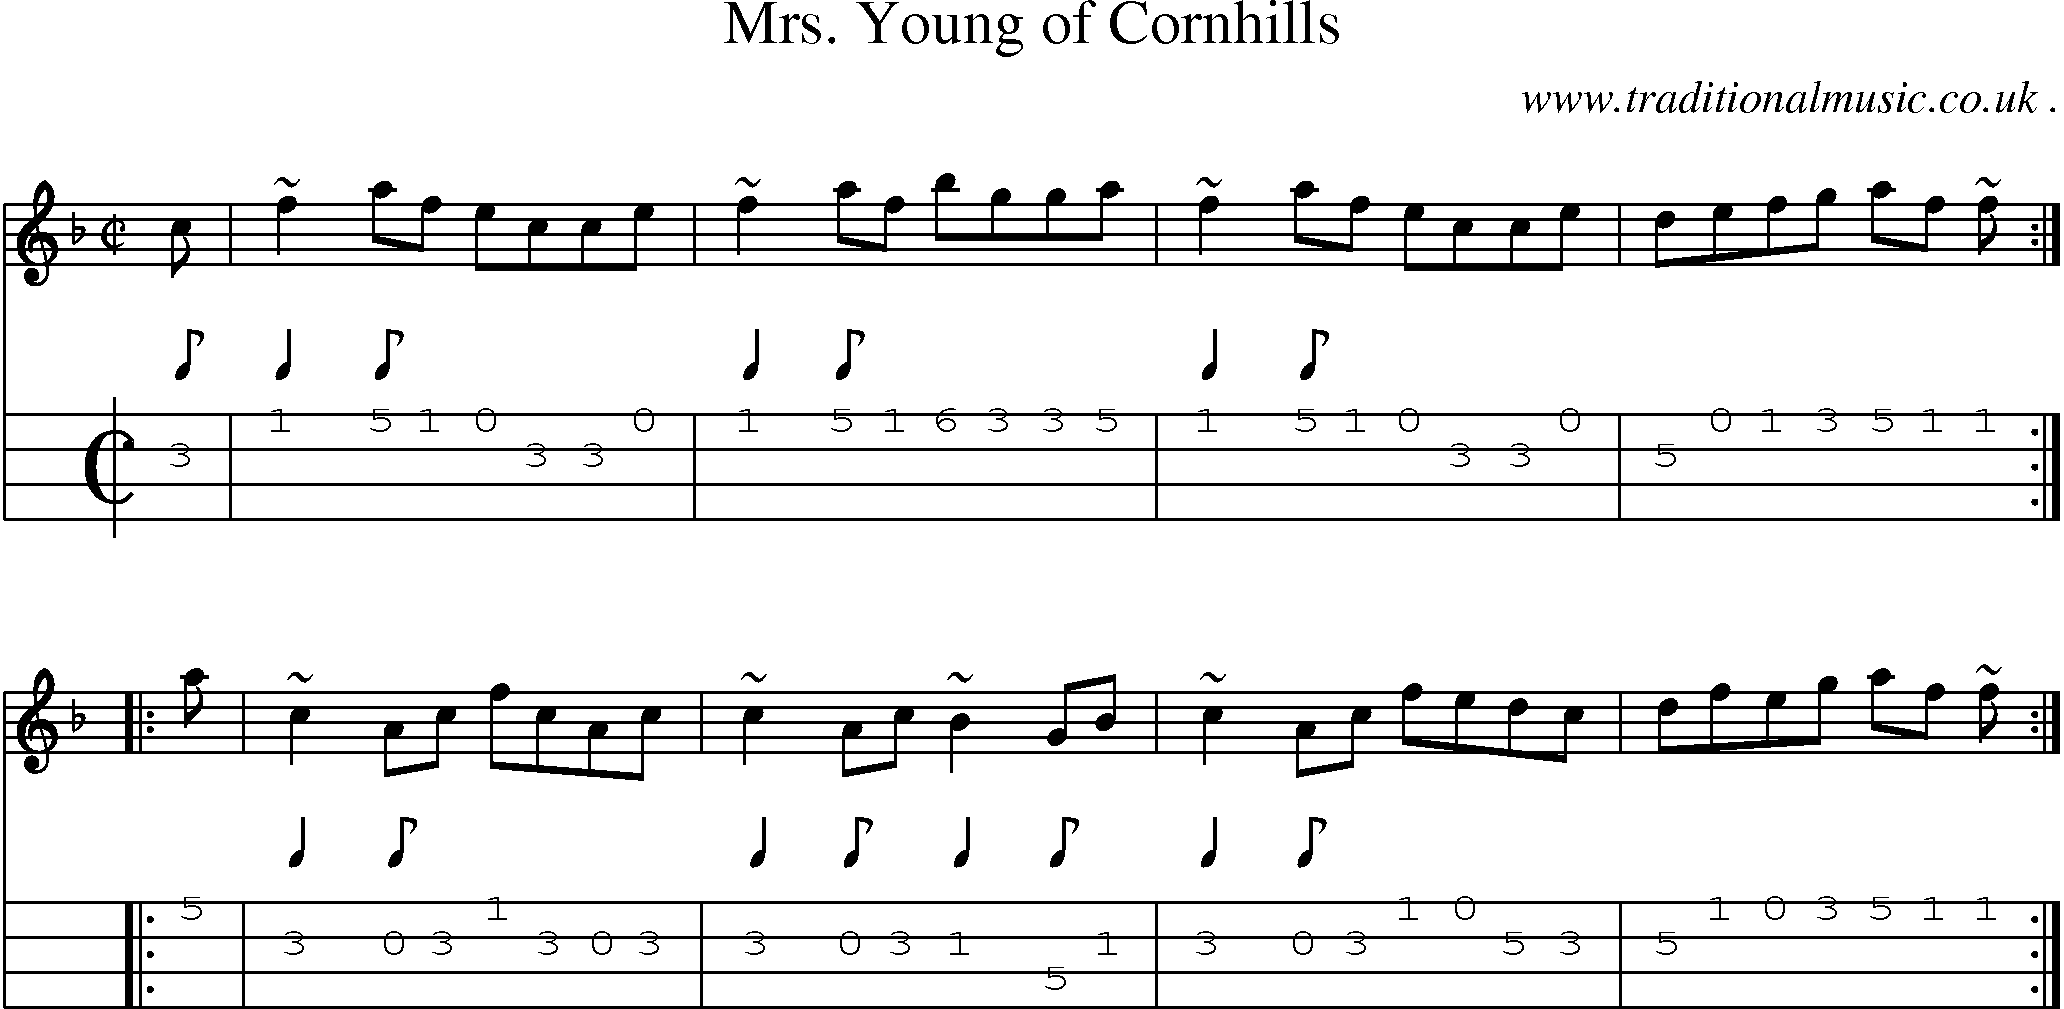 Sheet-music  score, Chords and Mandolin Tabs for Mrs Young Of Cornhills